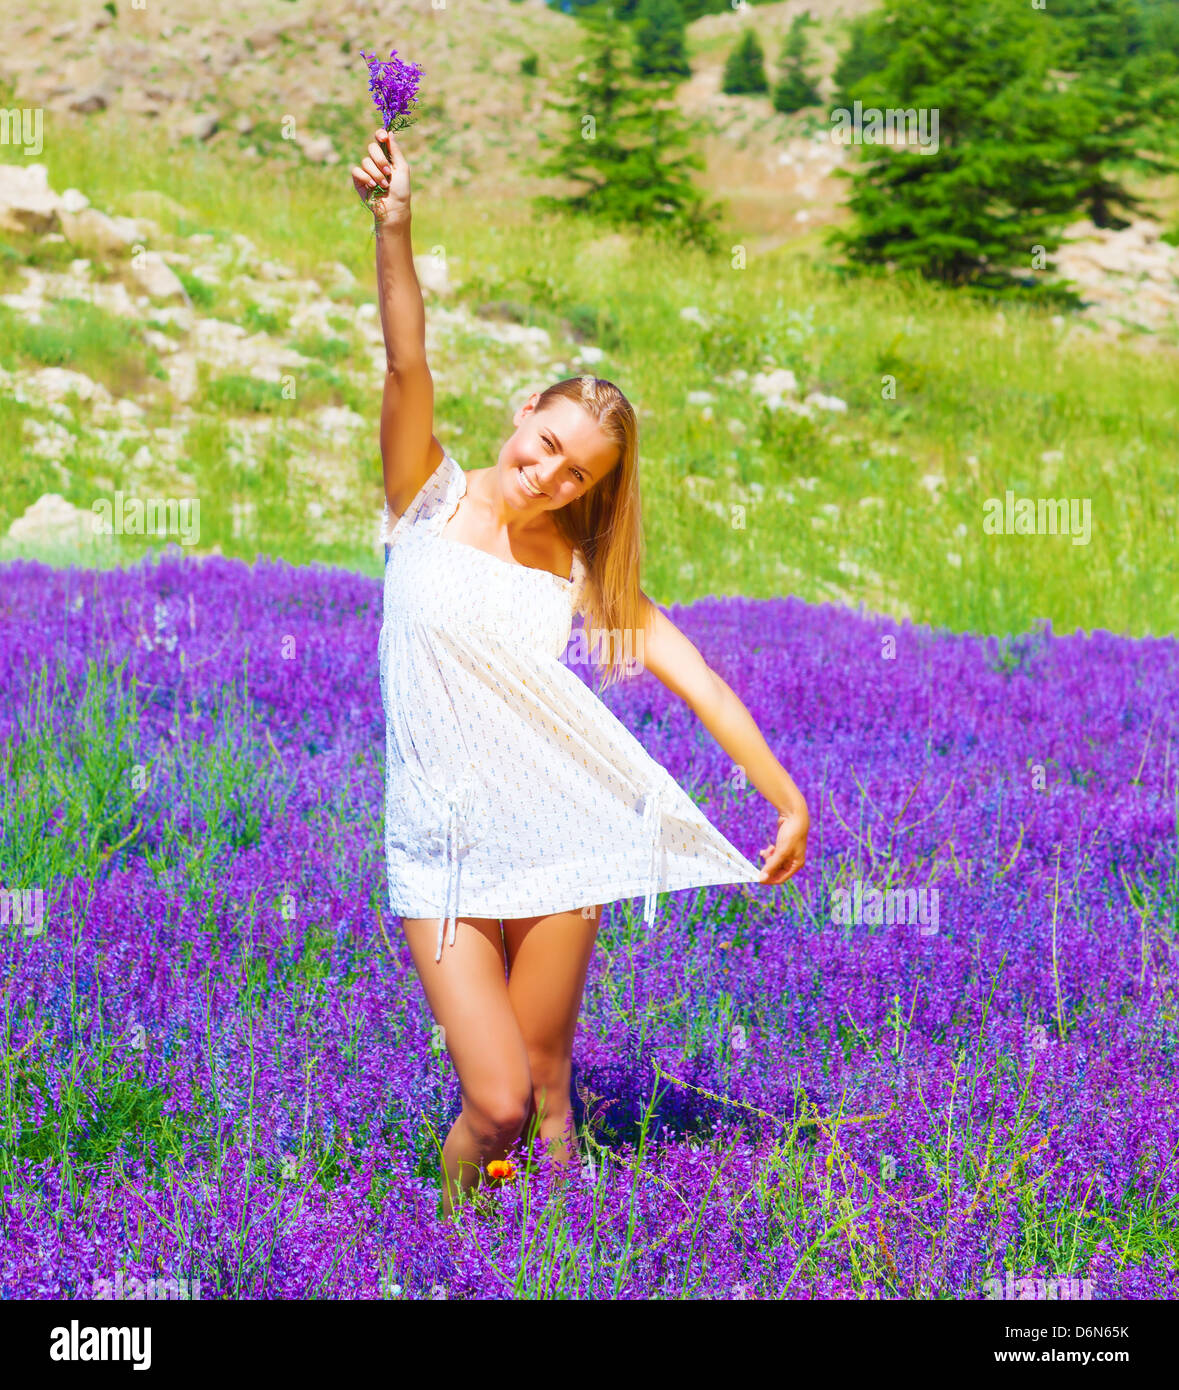 Pretty woman with lavender bouquet in hand dancing on purple flowers field, summer time holidays, leisure and freedom concept Stock Photo